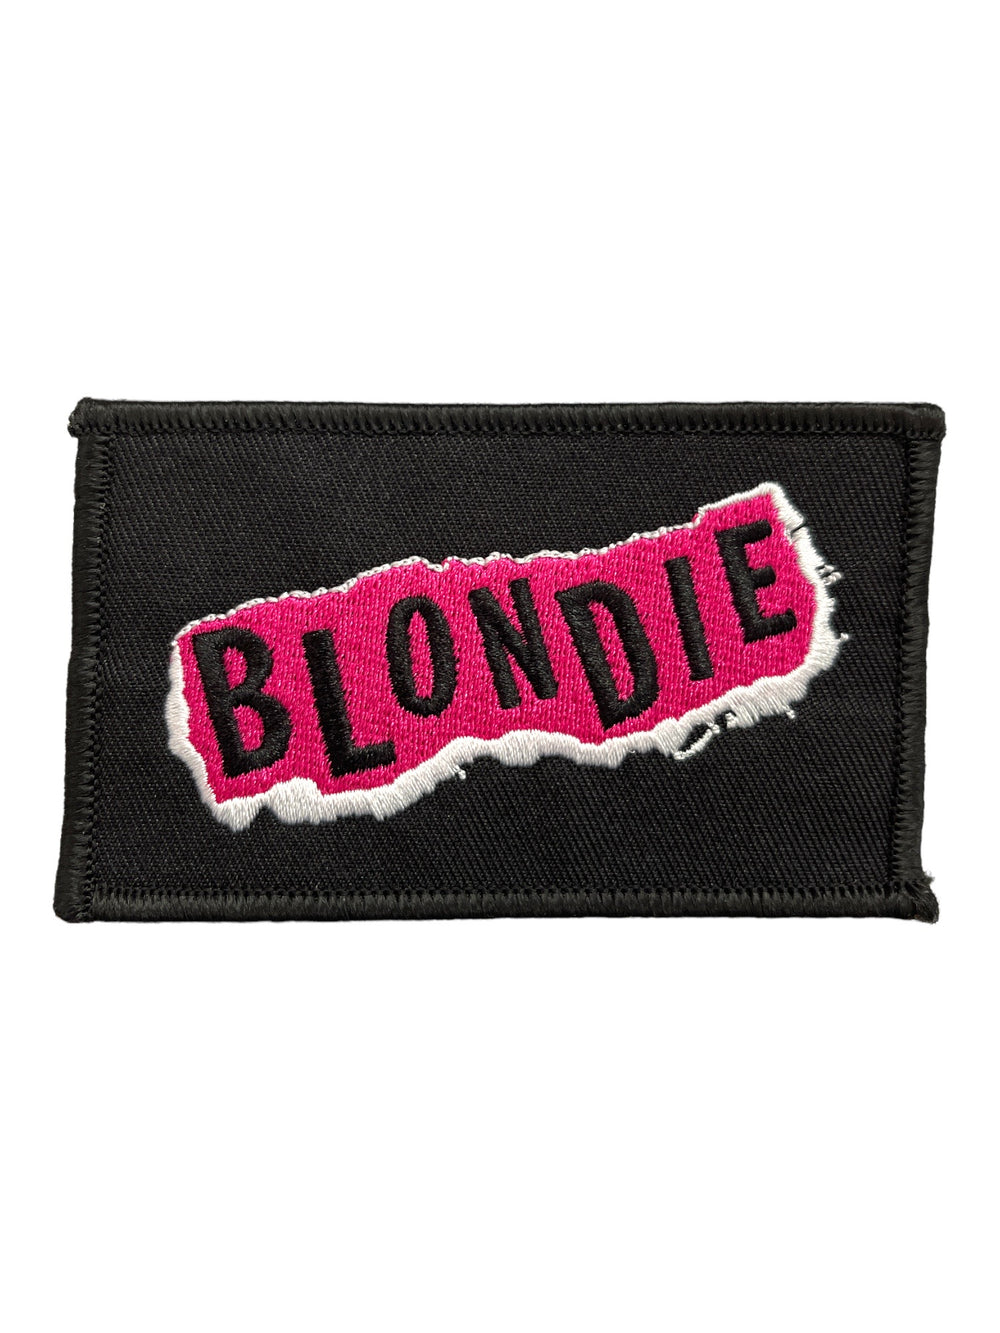 Blondie Punk Logo Official Woven Patch Brand New